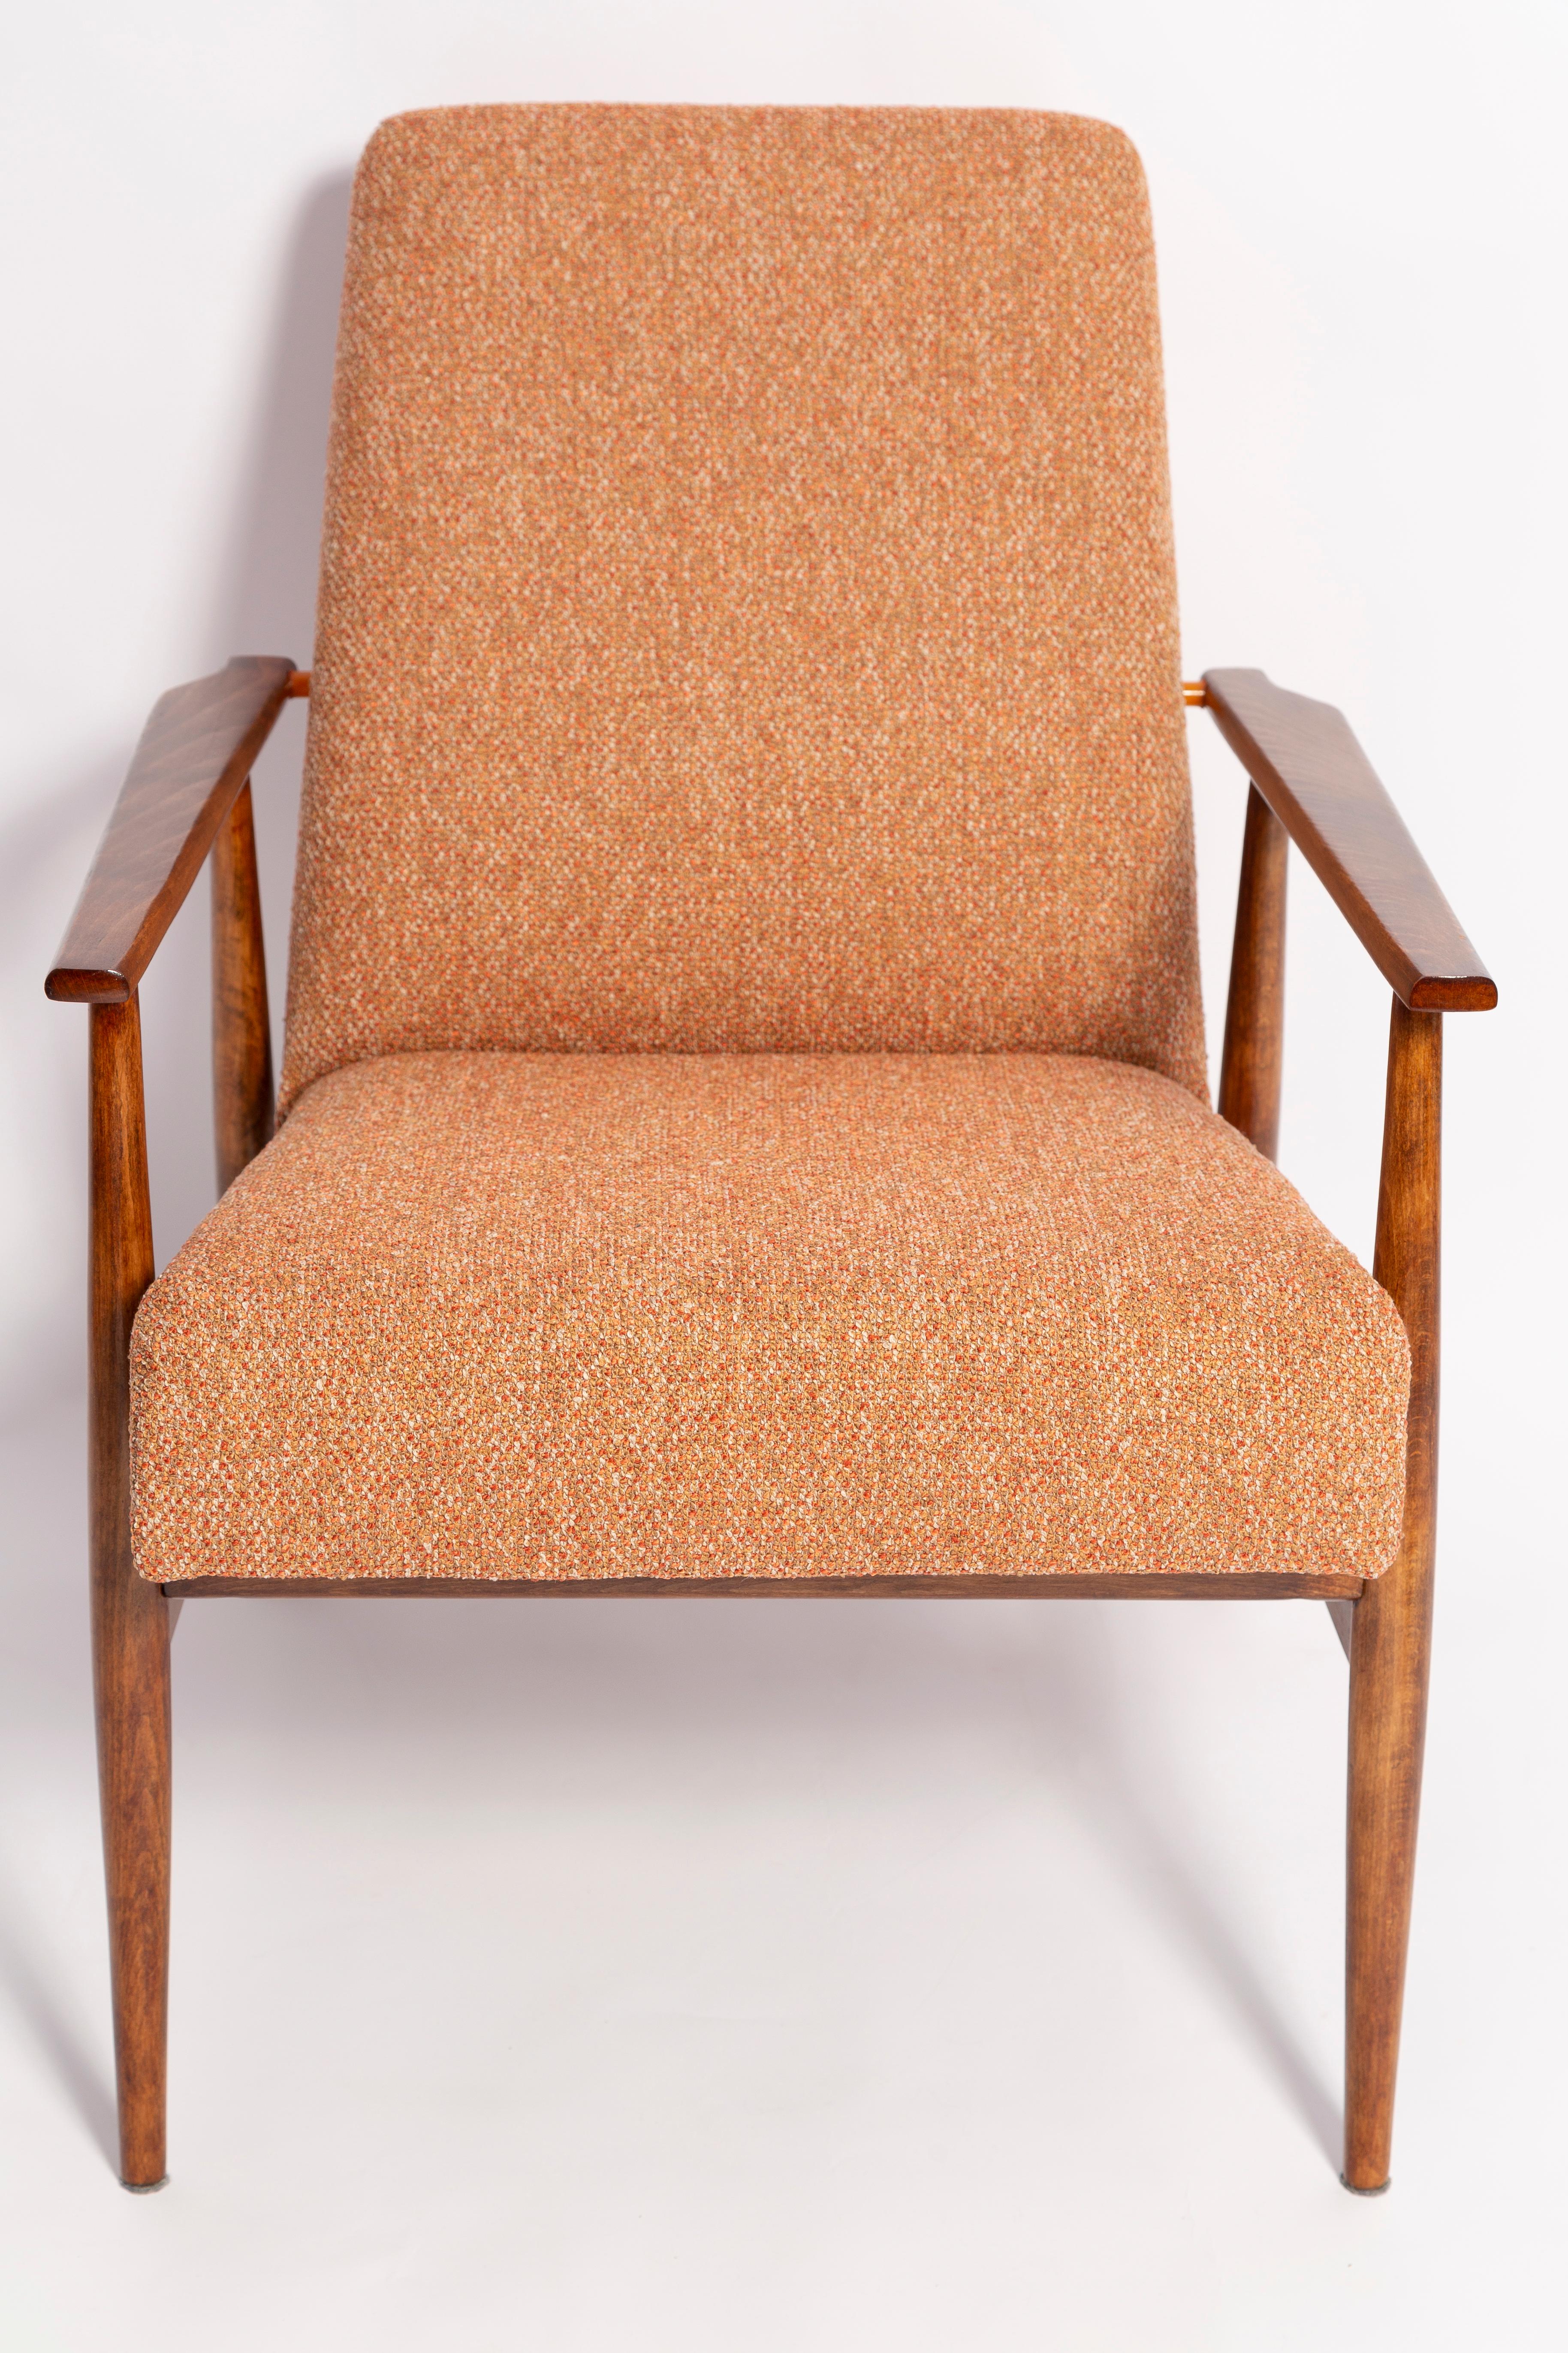 Set of Two Mid-Century Melange Dante Armchairs, H. Lis, 1960s For Sale 5